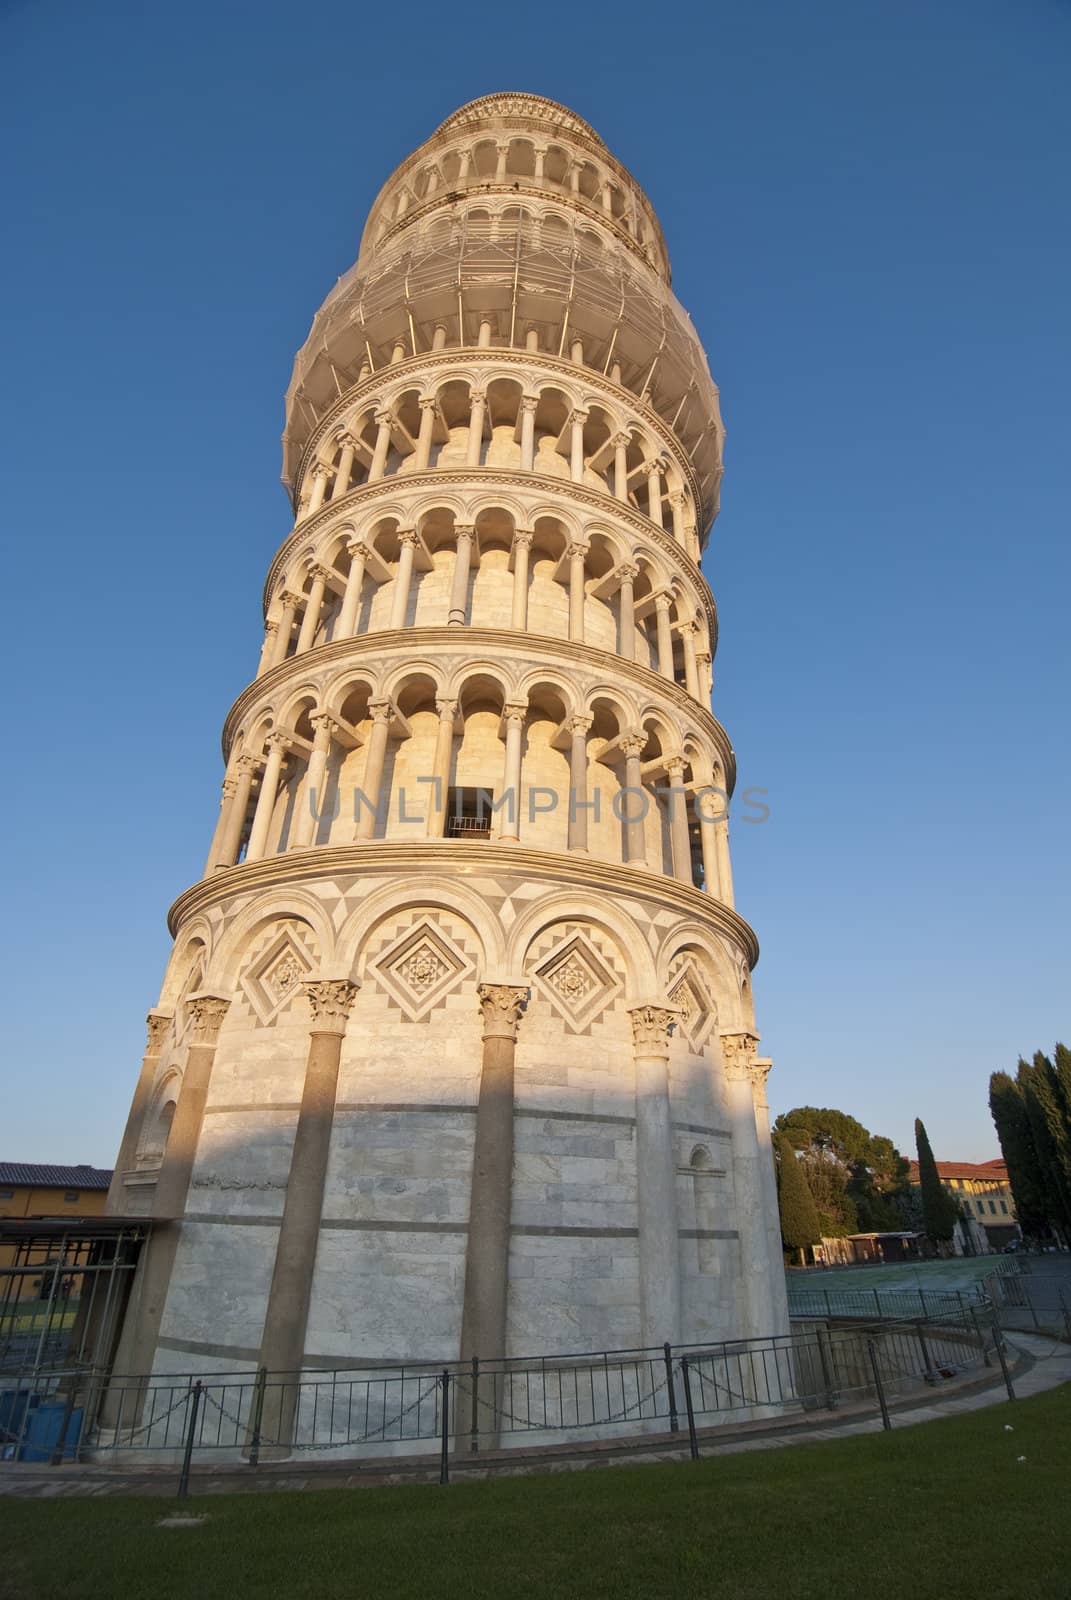 Leaning Tower, Piazza dei Miracoli, Pisa, Italy by jovannig